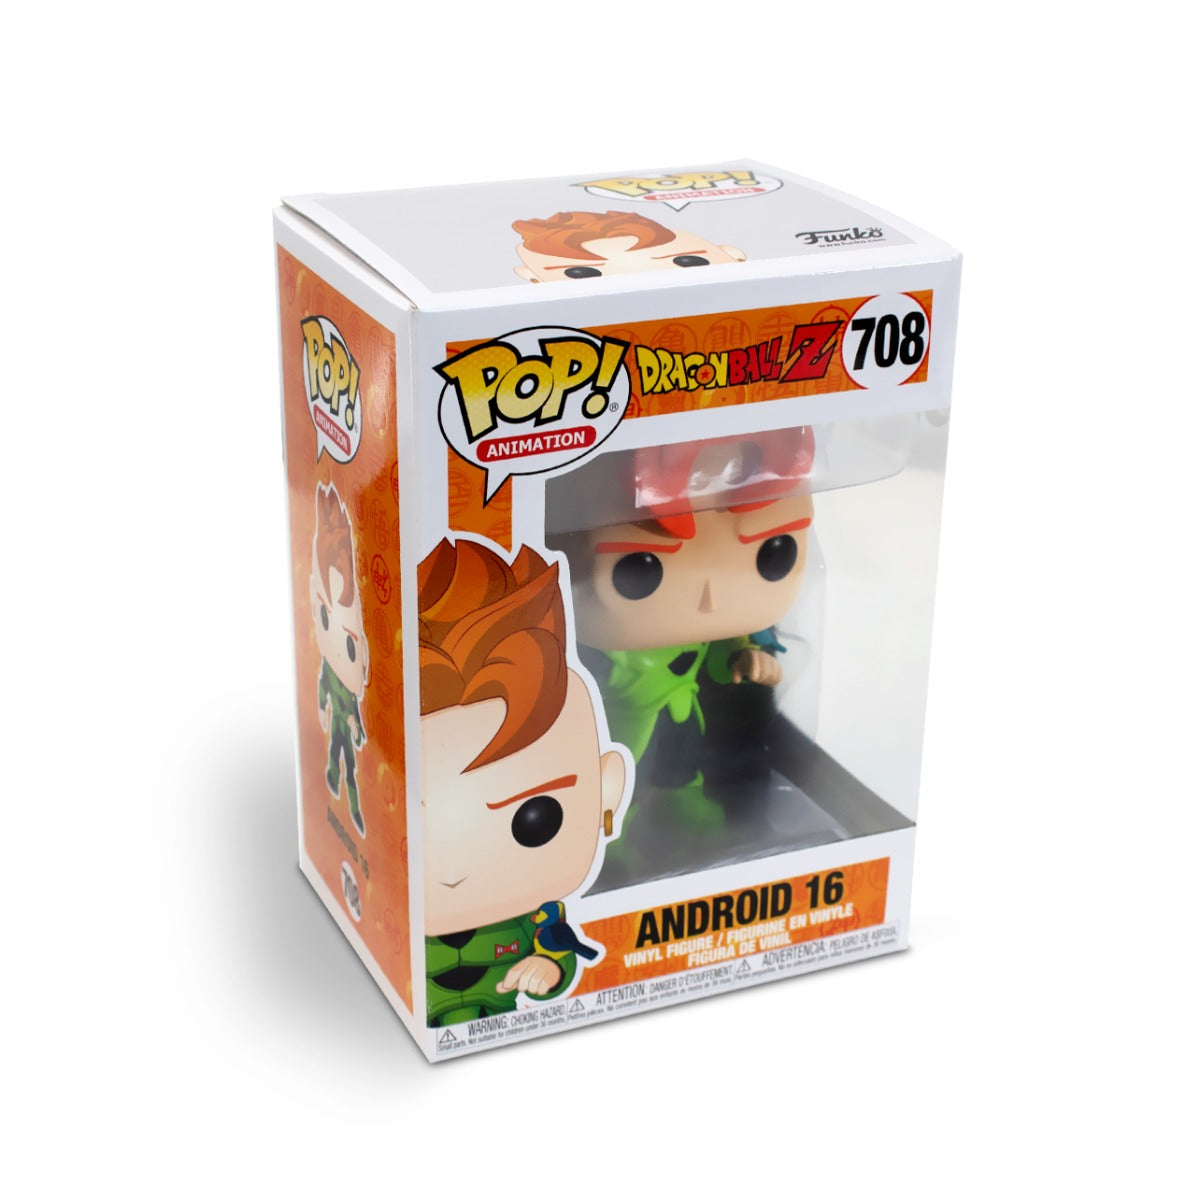 Funko POP Dragon Ball Z Android 16 Special Edition Beige